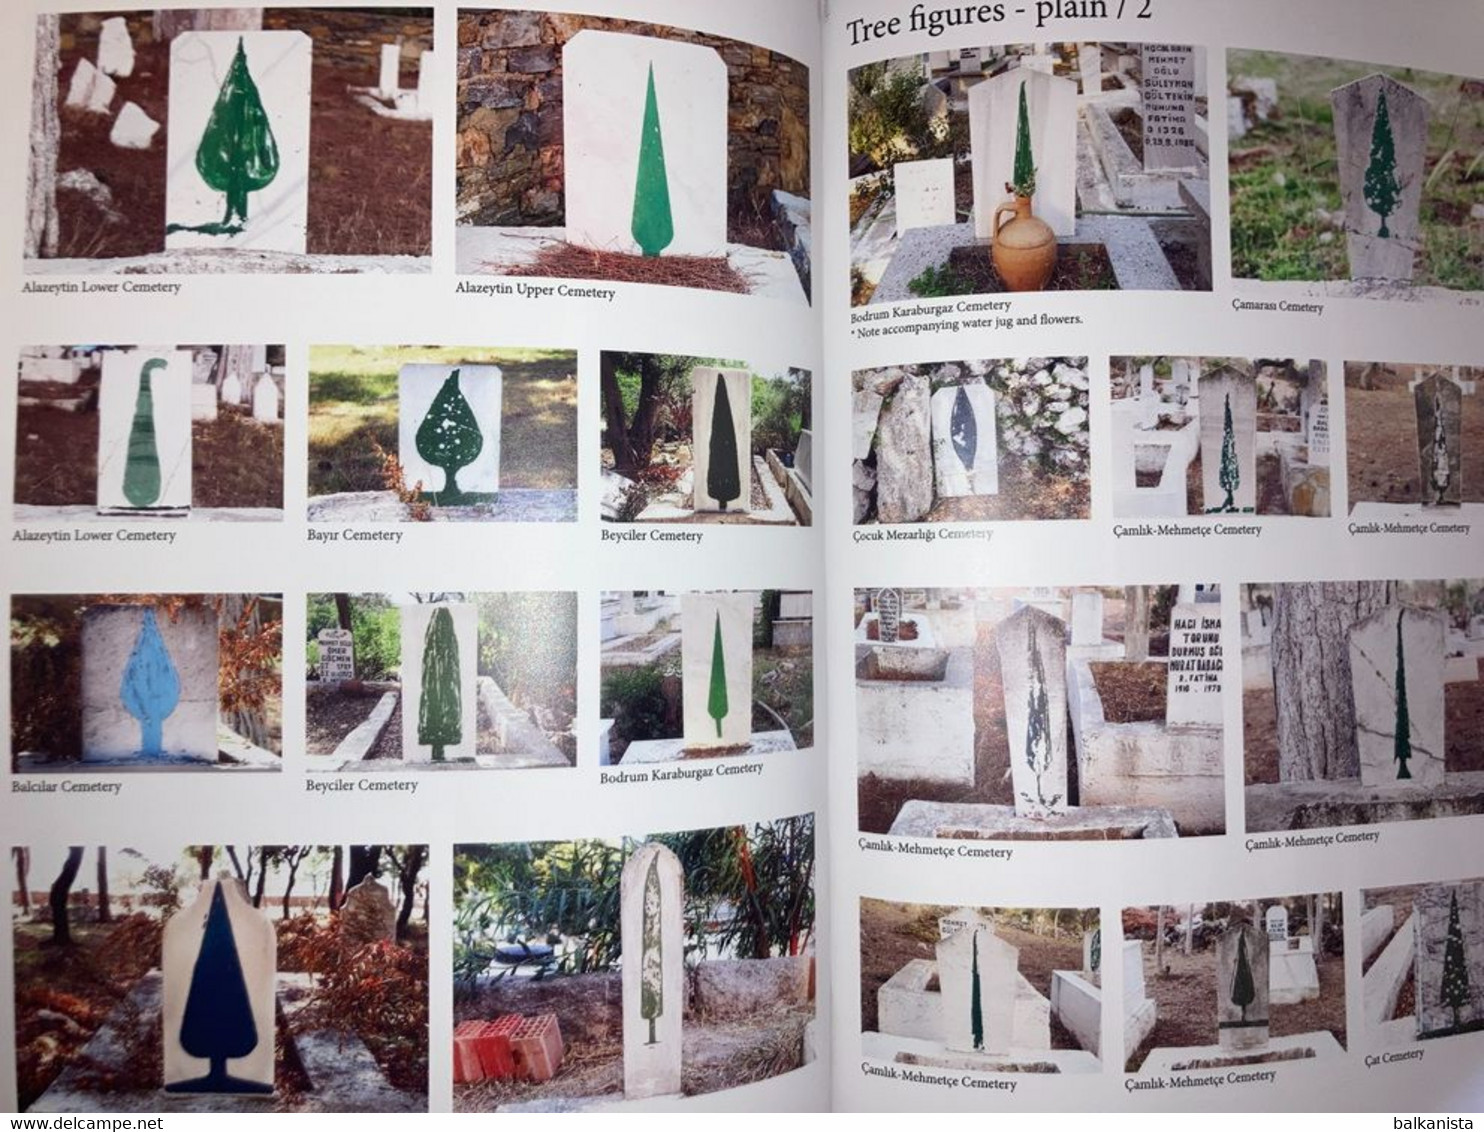 Forests Of The Afterlife Folk Art And Symbolism In Village Cemeteries Of Turkey - Ancient